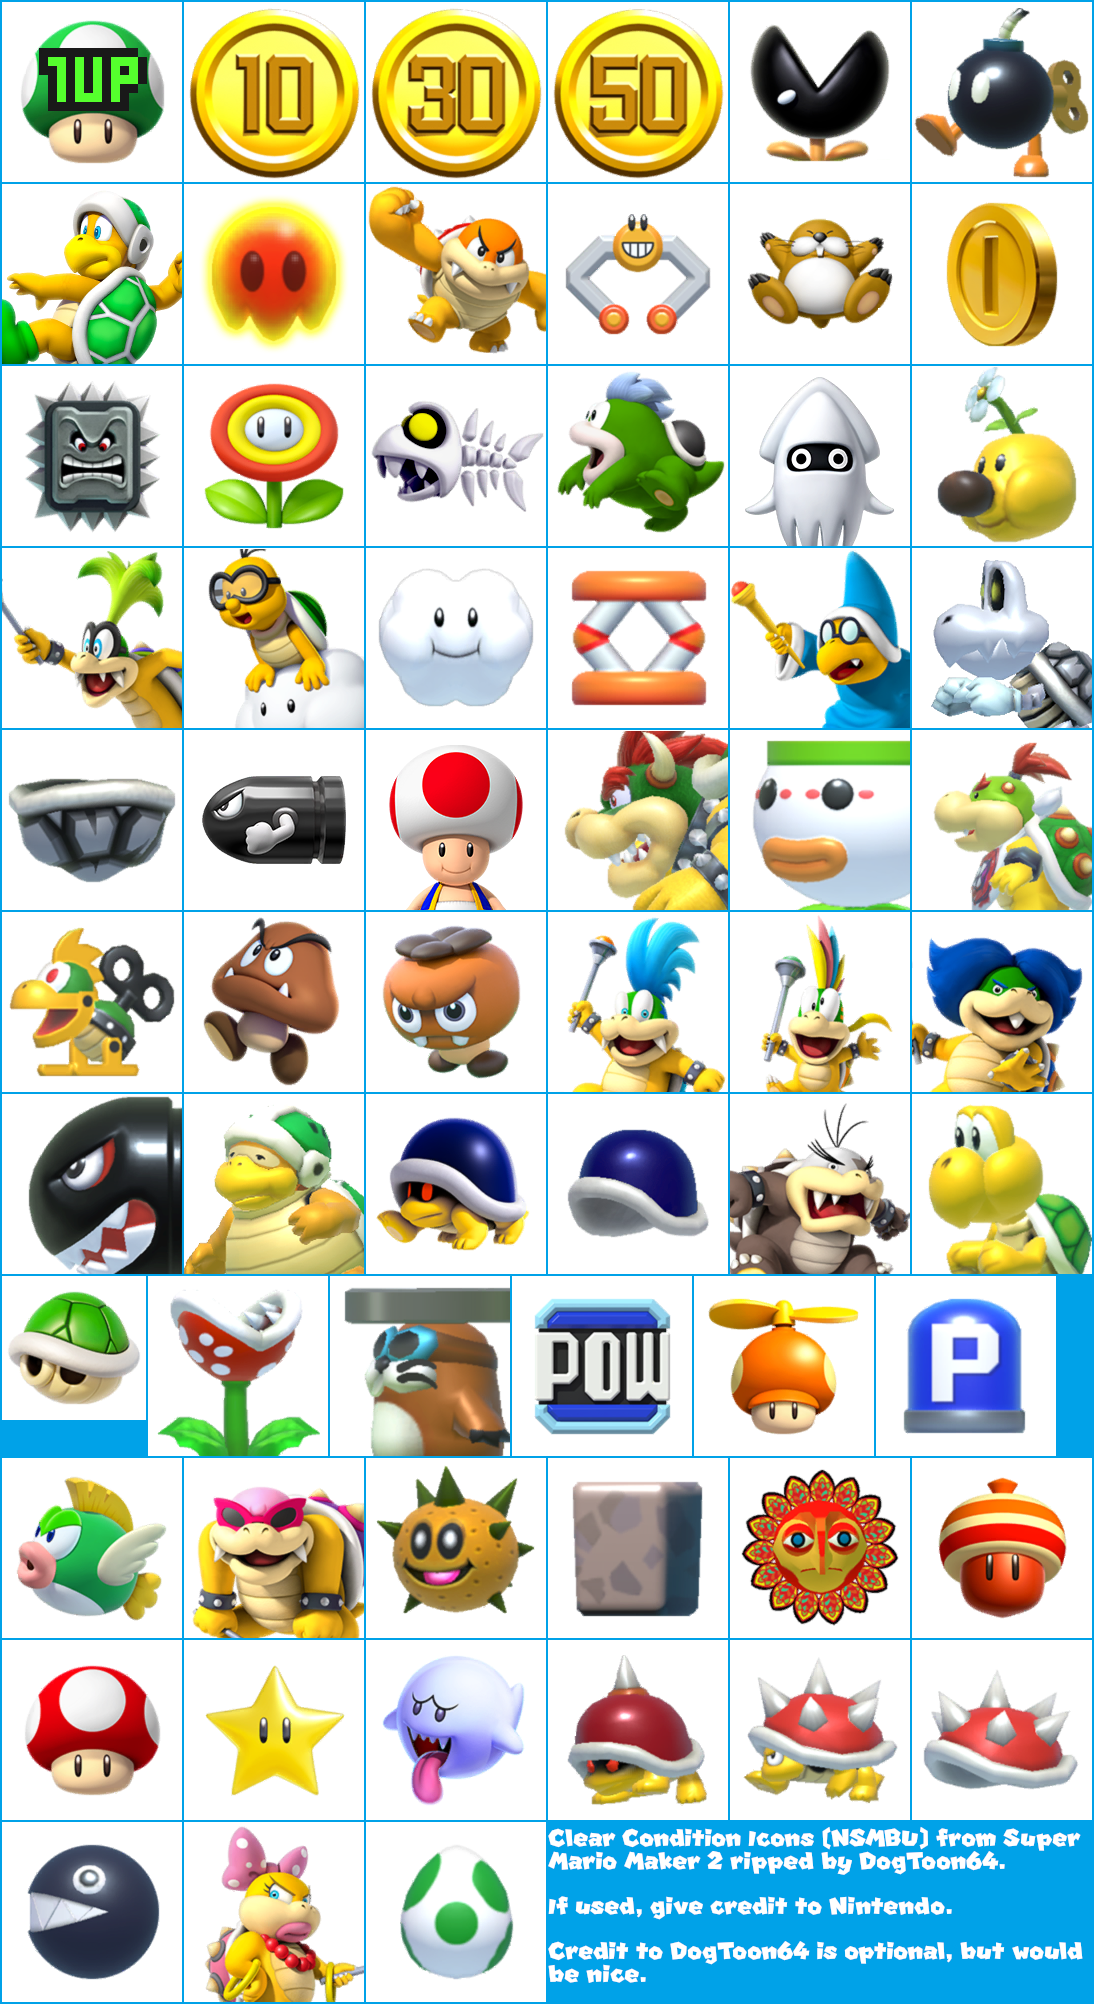 Clear Condition Icons (NSMBU)